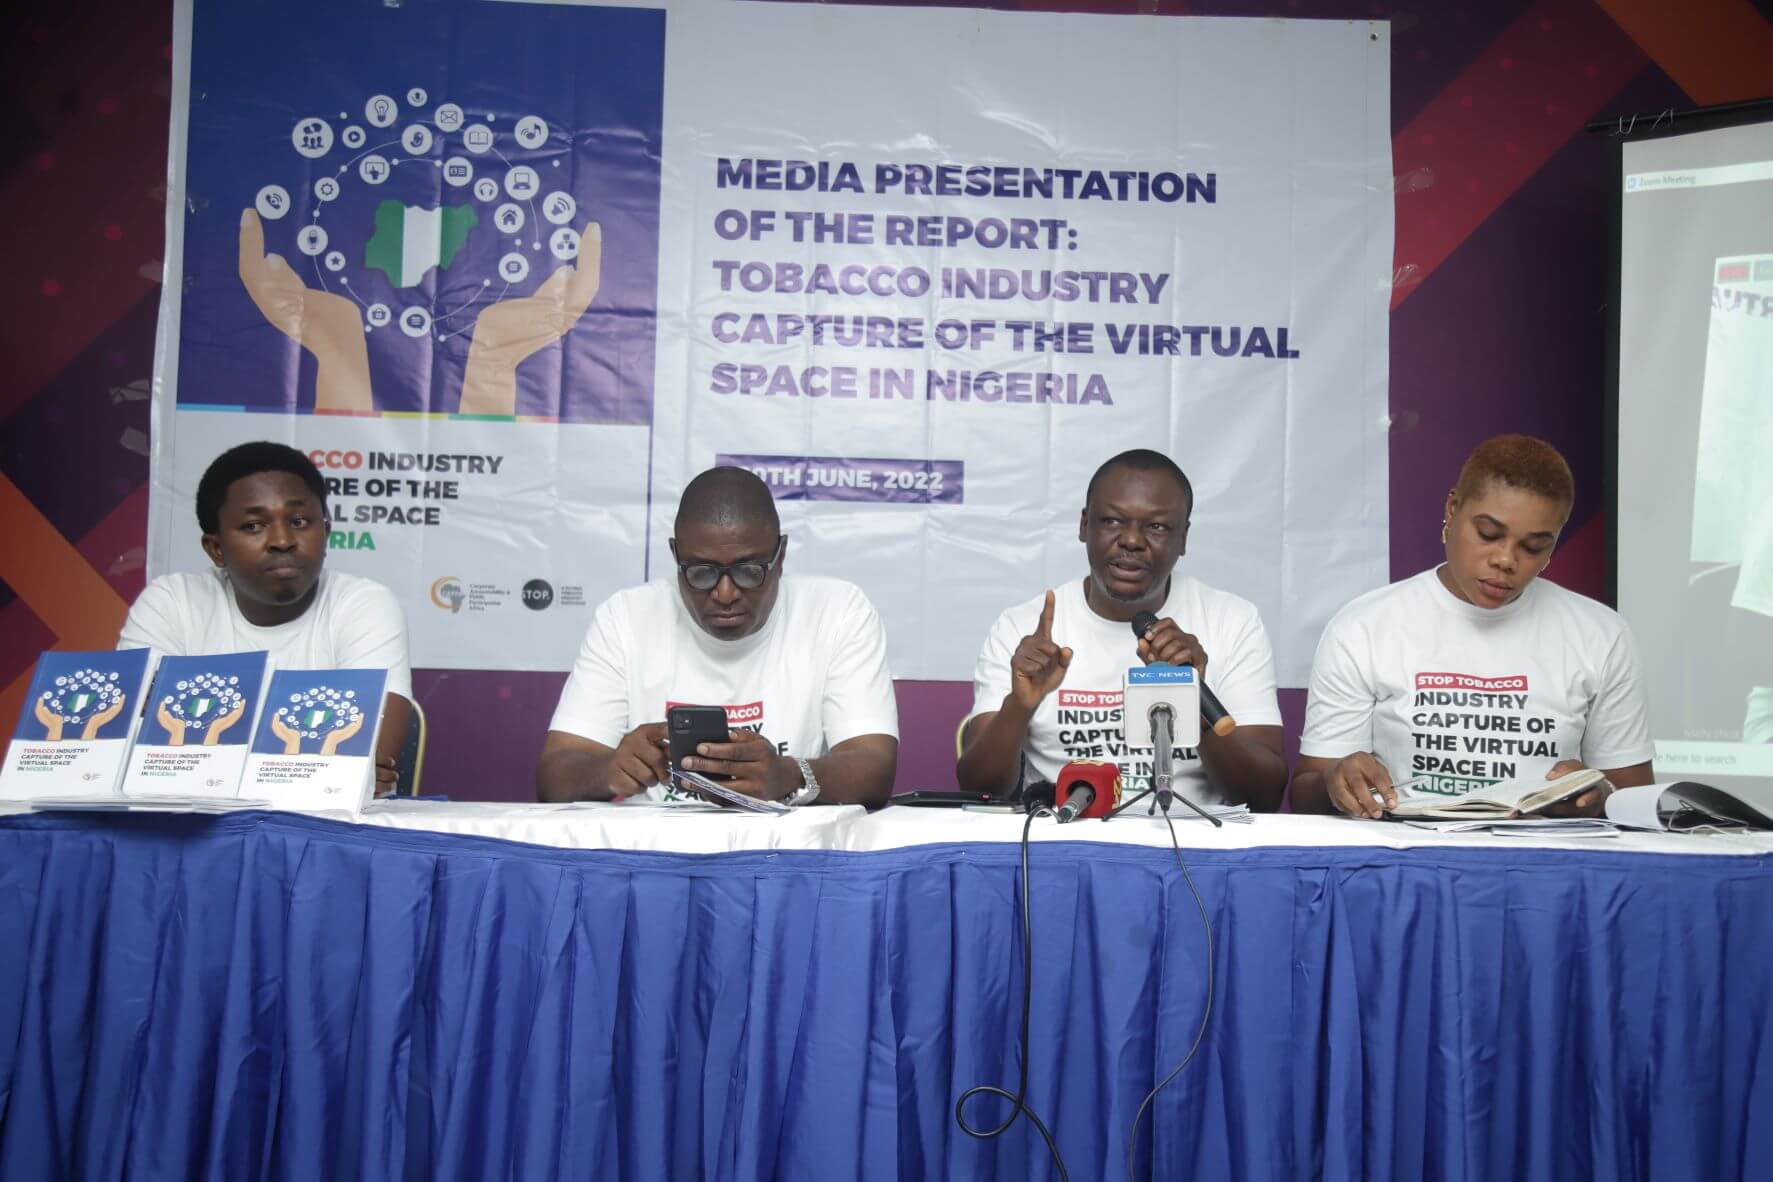 New Report Reveals How Tobacco Industry Has Captured the Virtual Space in Nigeria